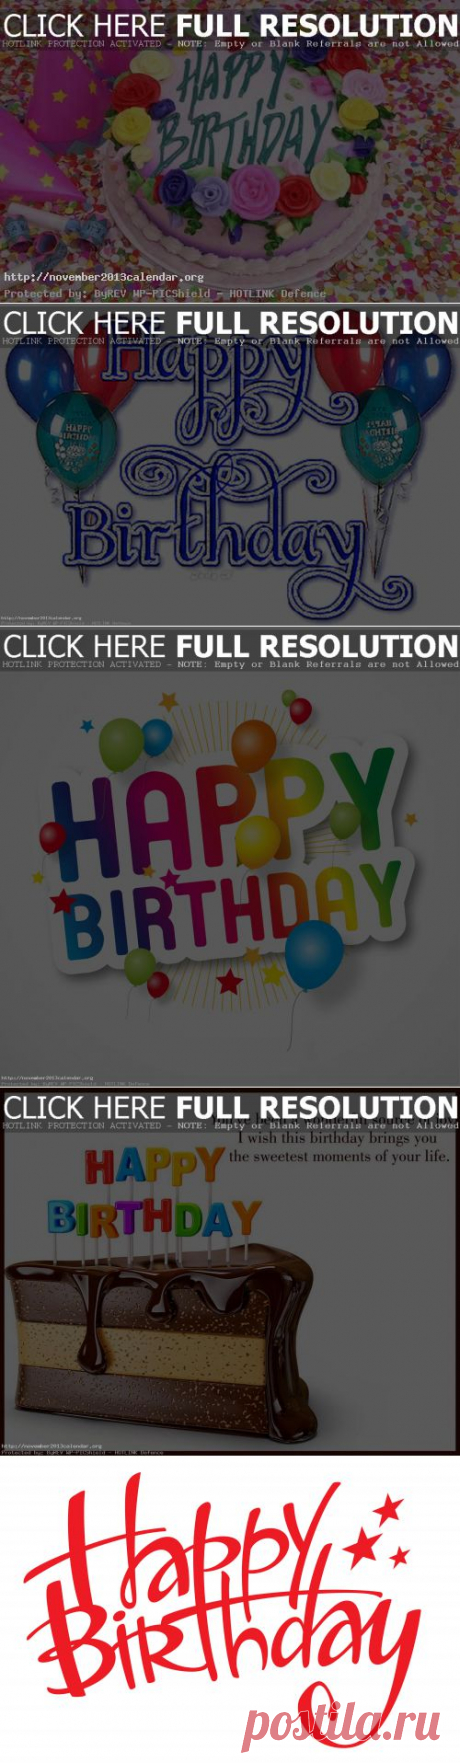 Happy birthday images and Text Pictures | Download Free Word, Excel, PDF